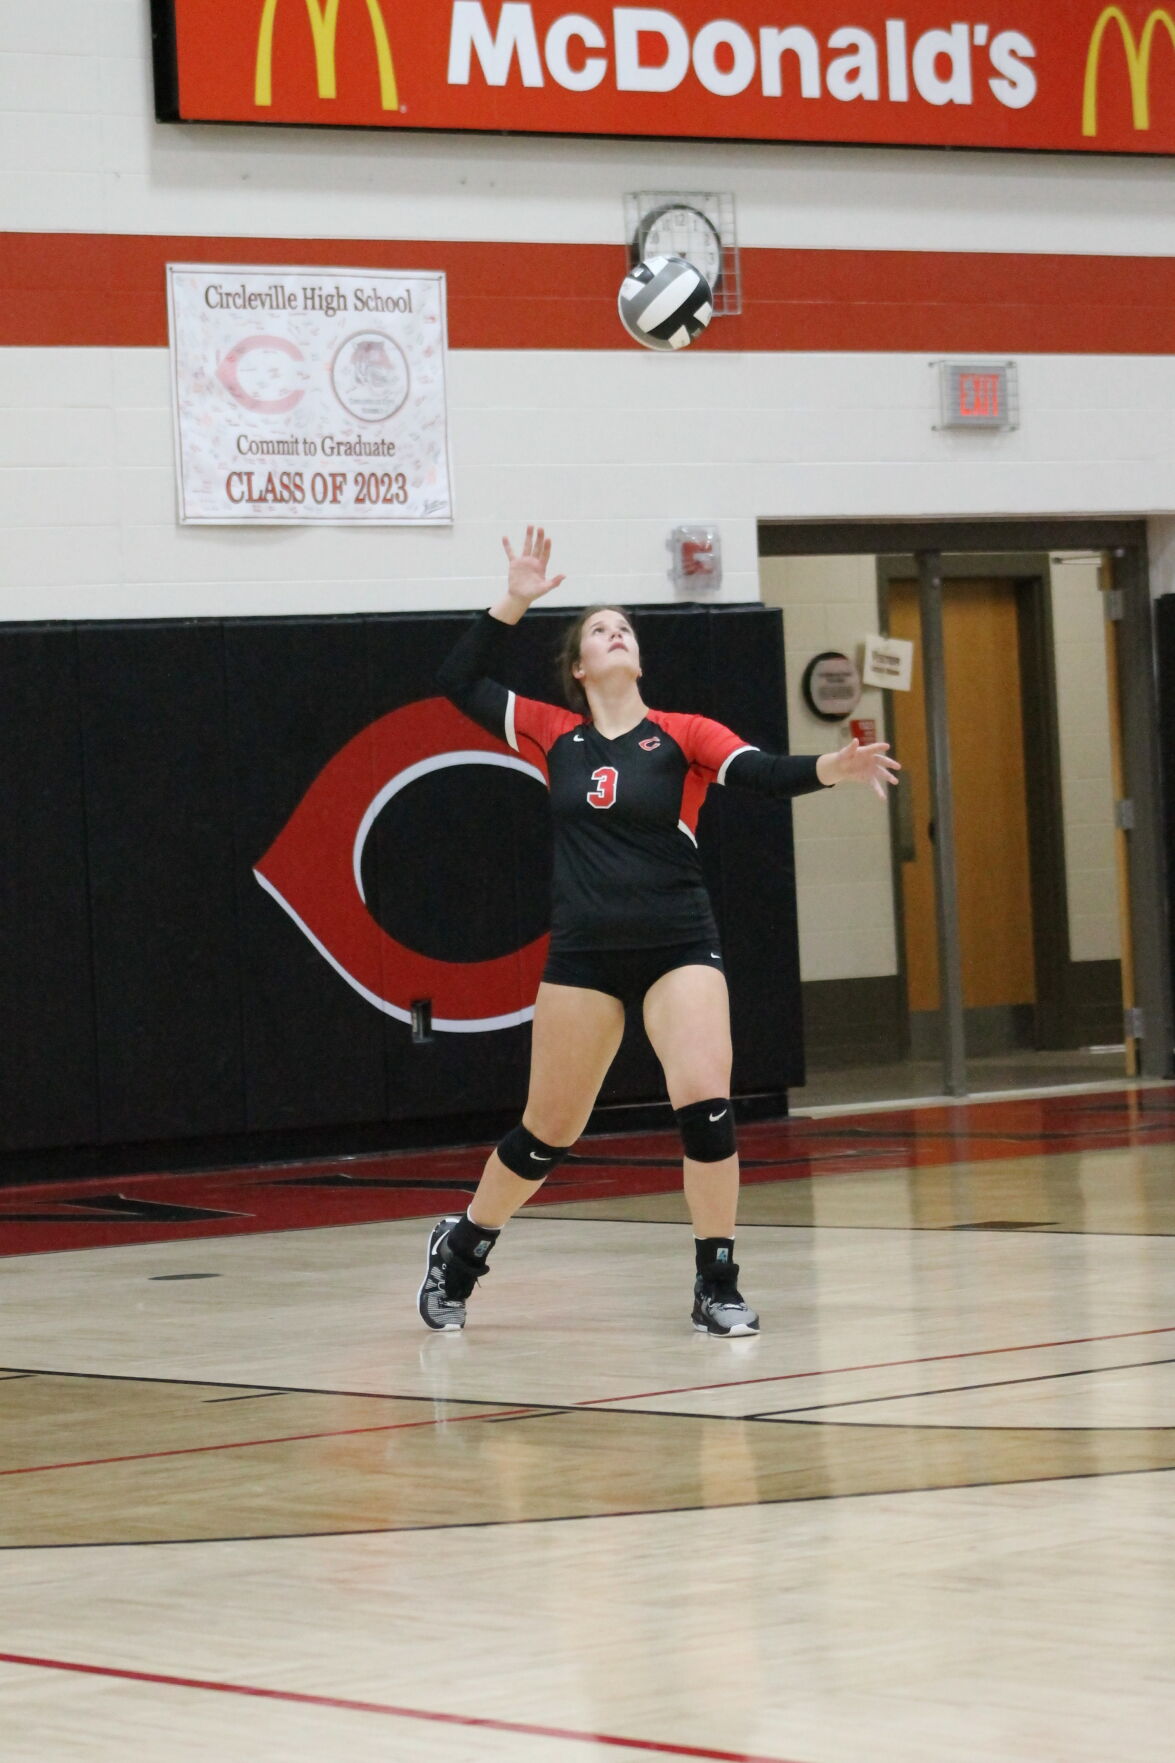 Circleville defeats Teays Valley 3-0 and looks ahead to Circleville Invitational